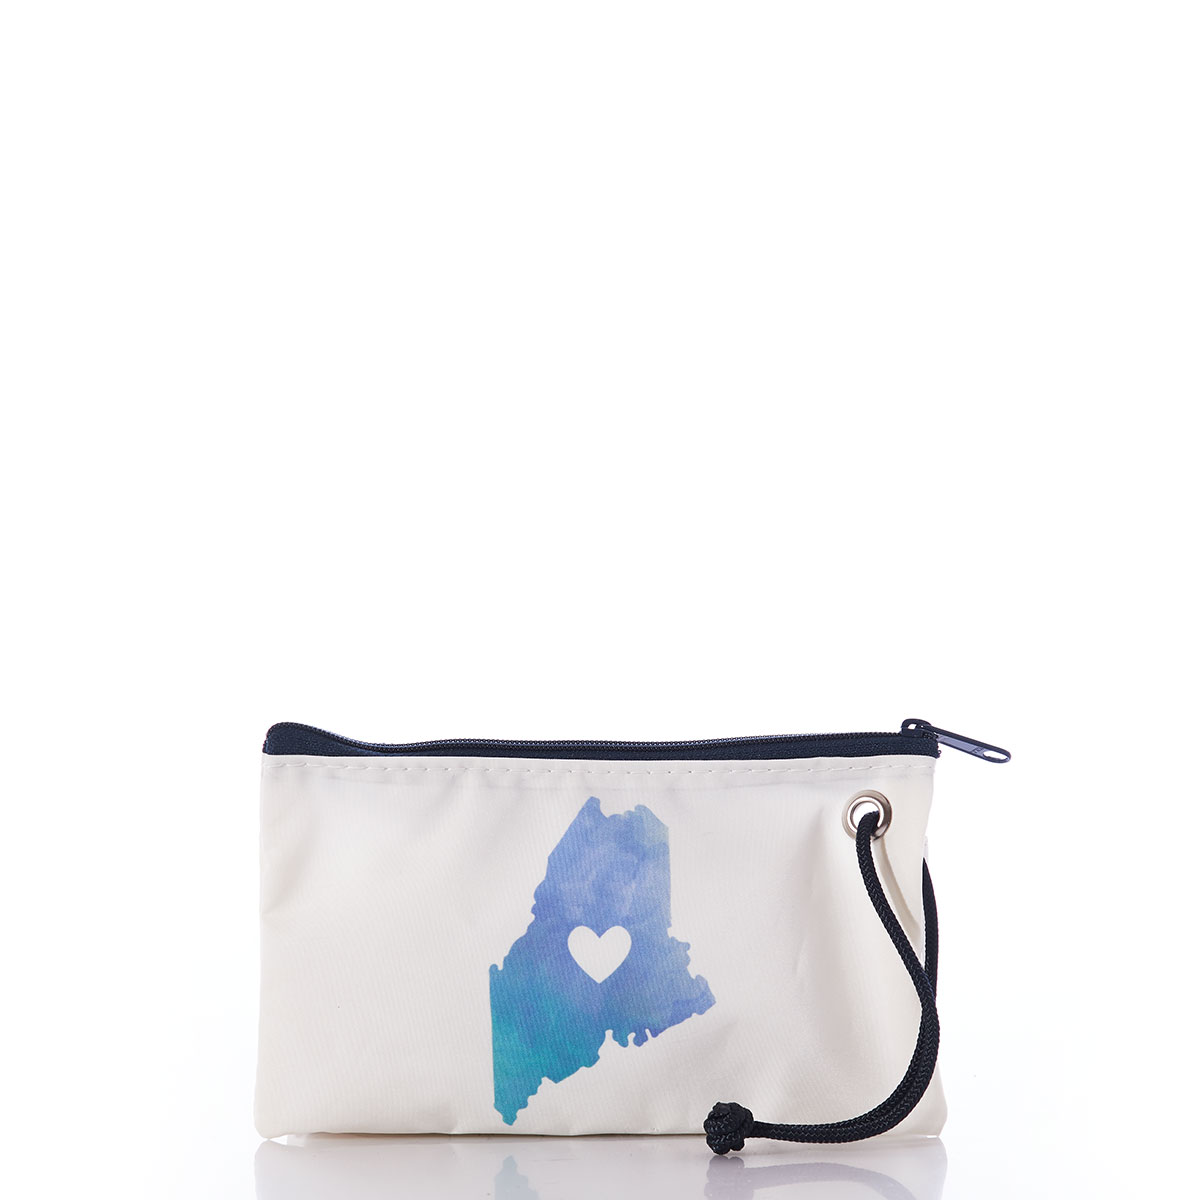 blue and green watercolor style print in the shape of the state of Maine on white sail cloth wristlet with a heart shape of white in the middle